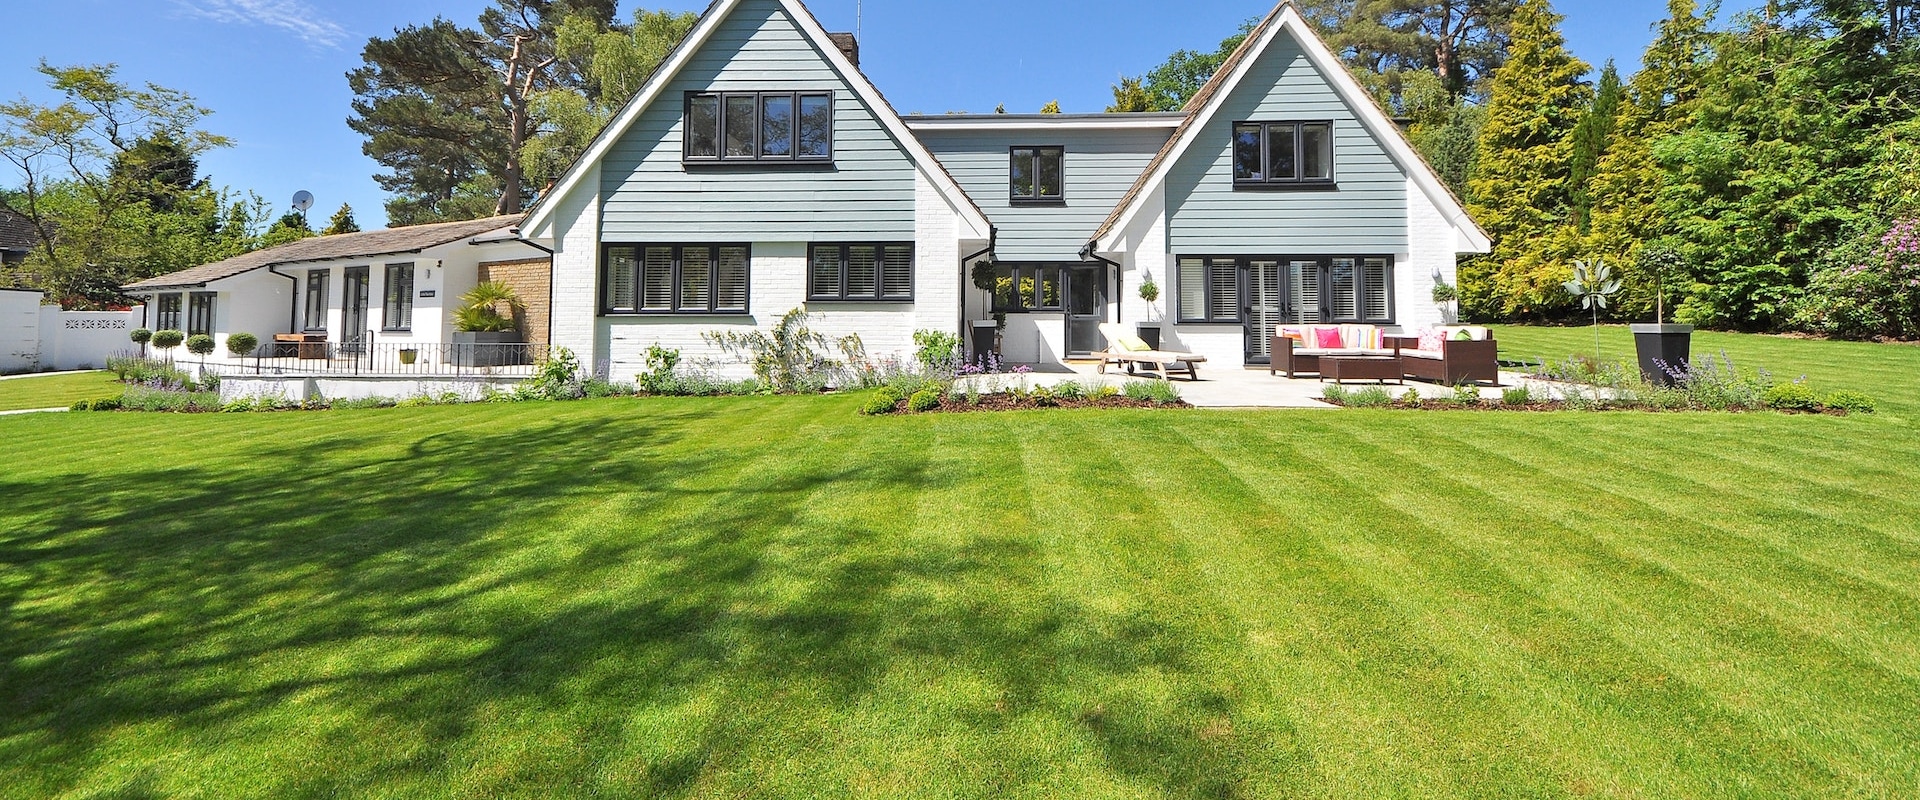 Transforming Your Lawn In Northern Virginia: The Benefits Of Professional Lawn Care Service